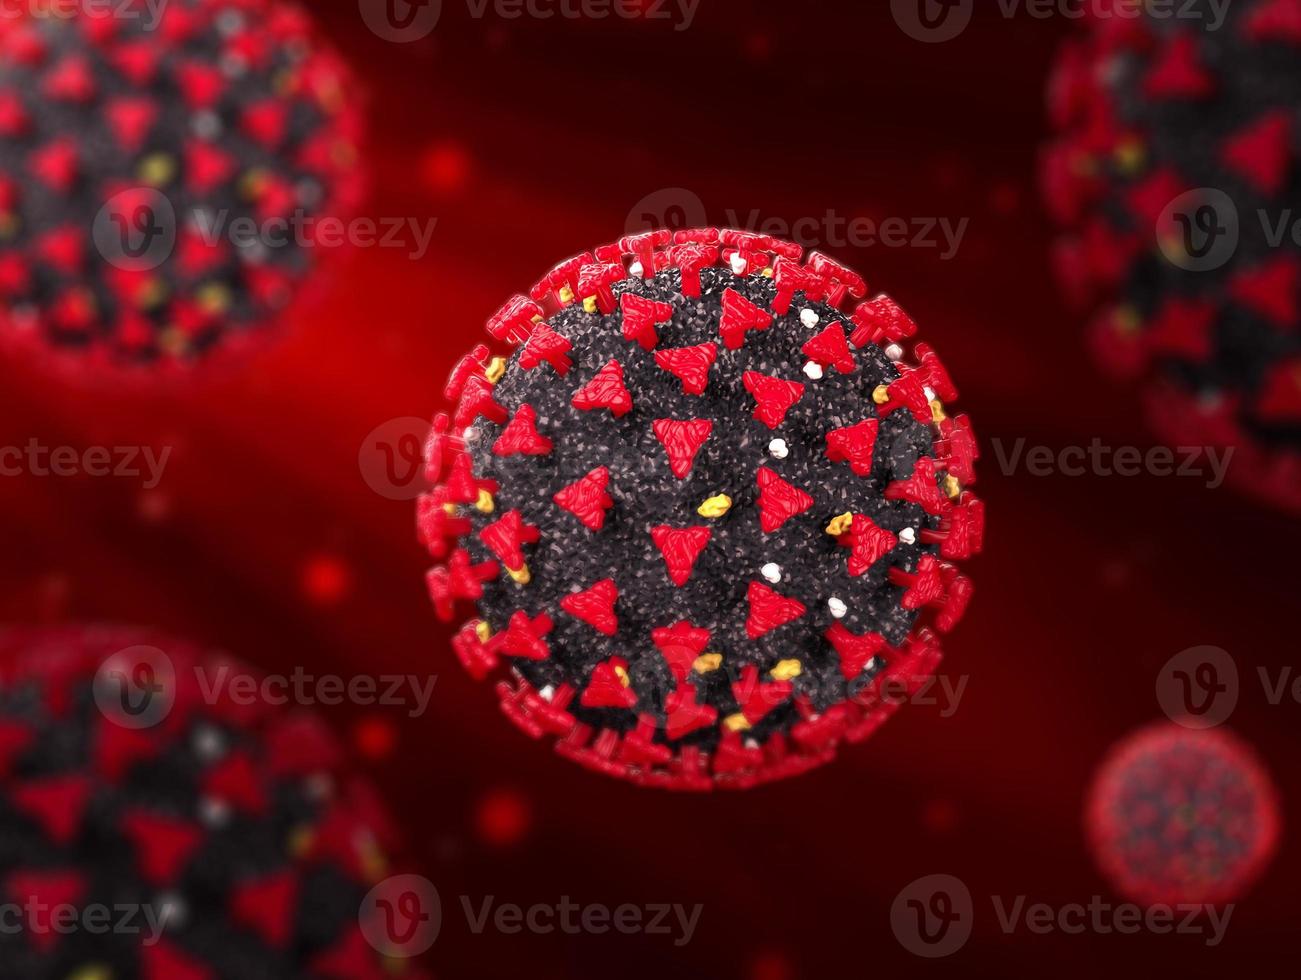 Scientific accurate Coronavirus COVID-19 on red background 3d illustration 3d rendering photo